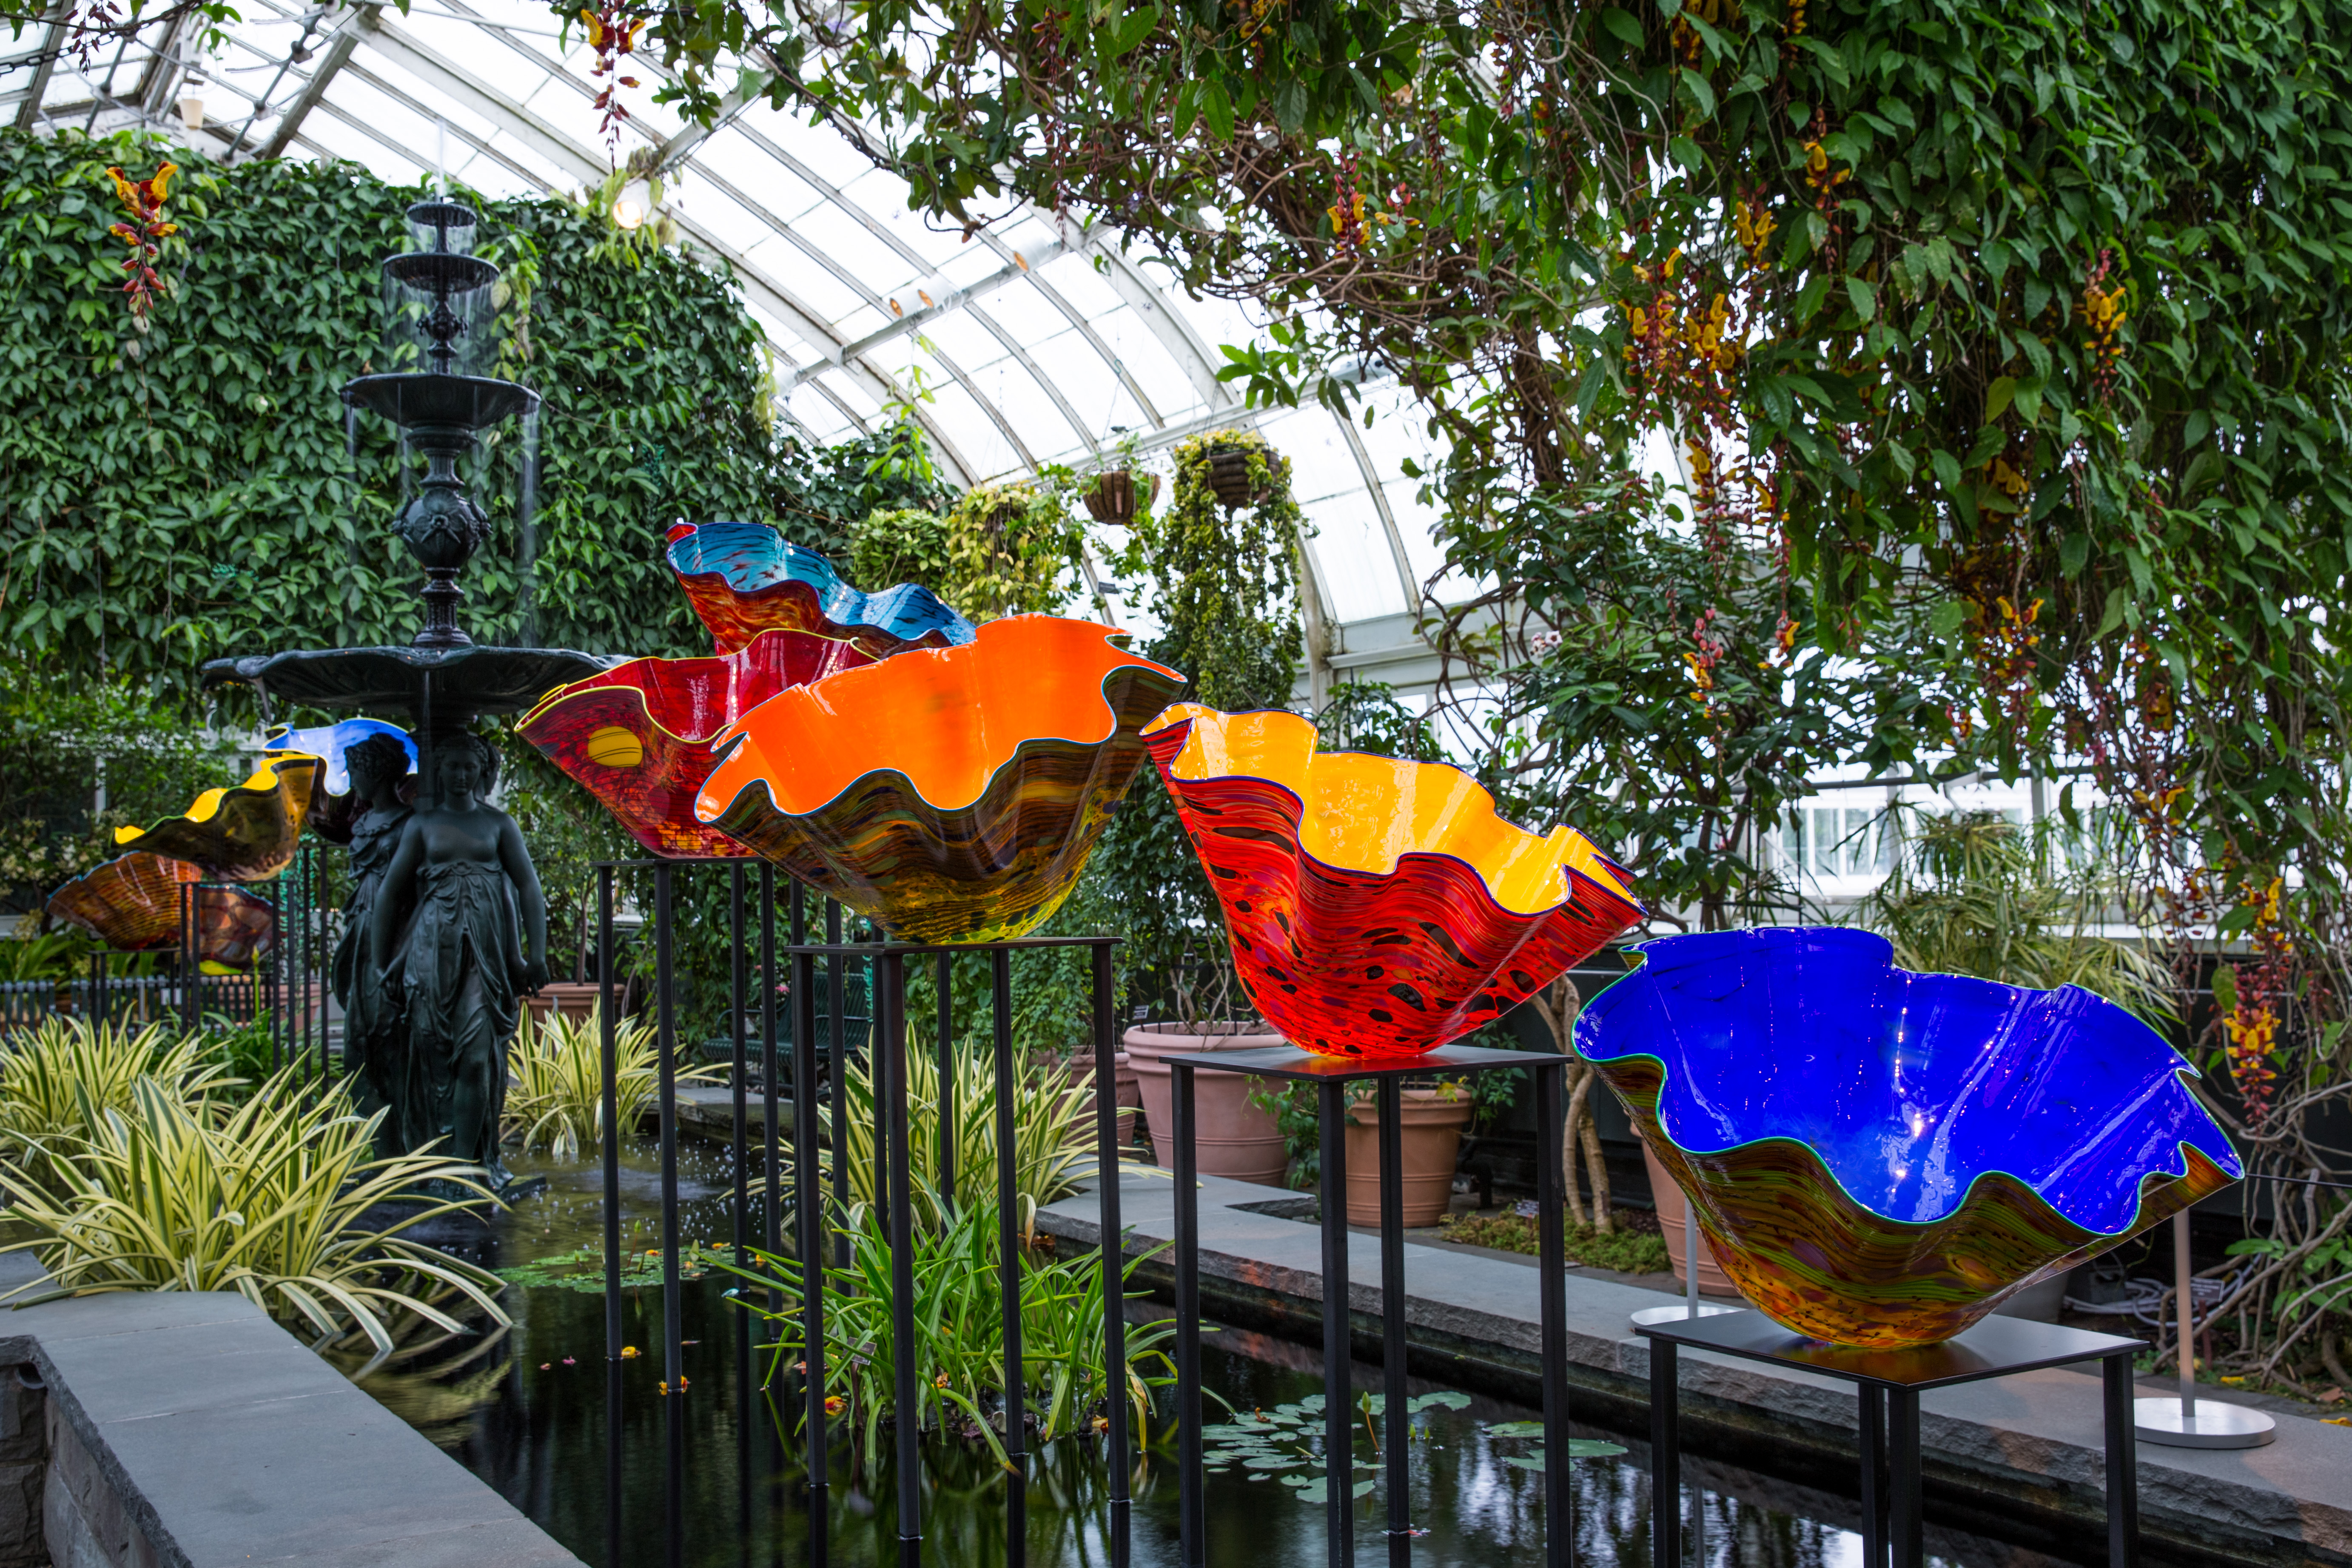 NYBG CHIHULY 09 Macchia Forest 2017